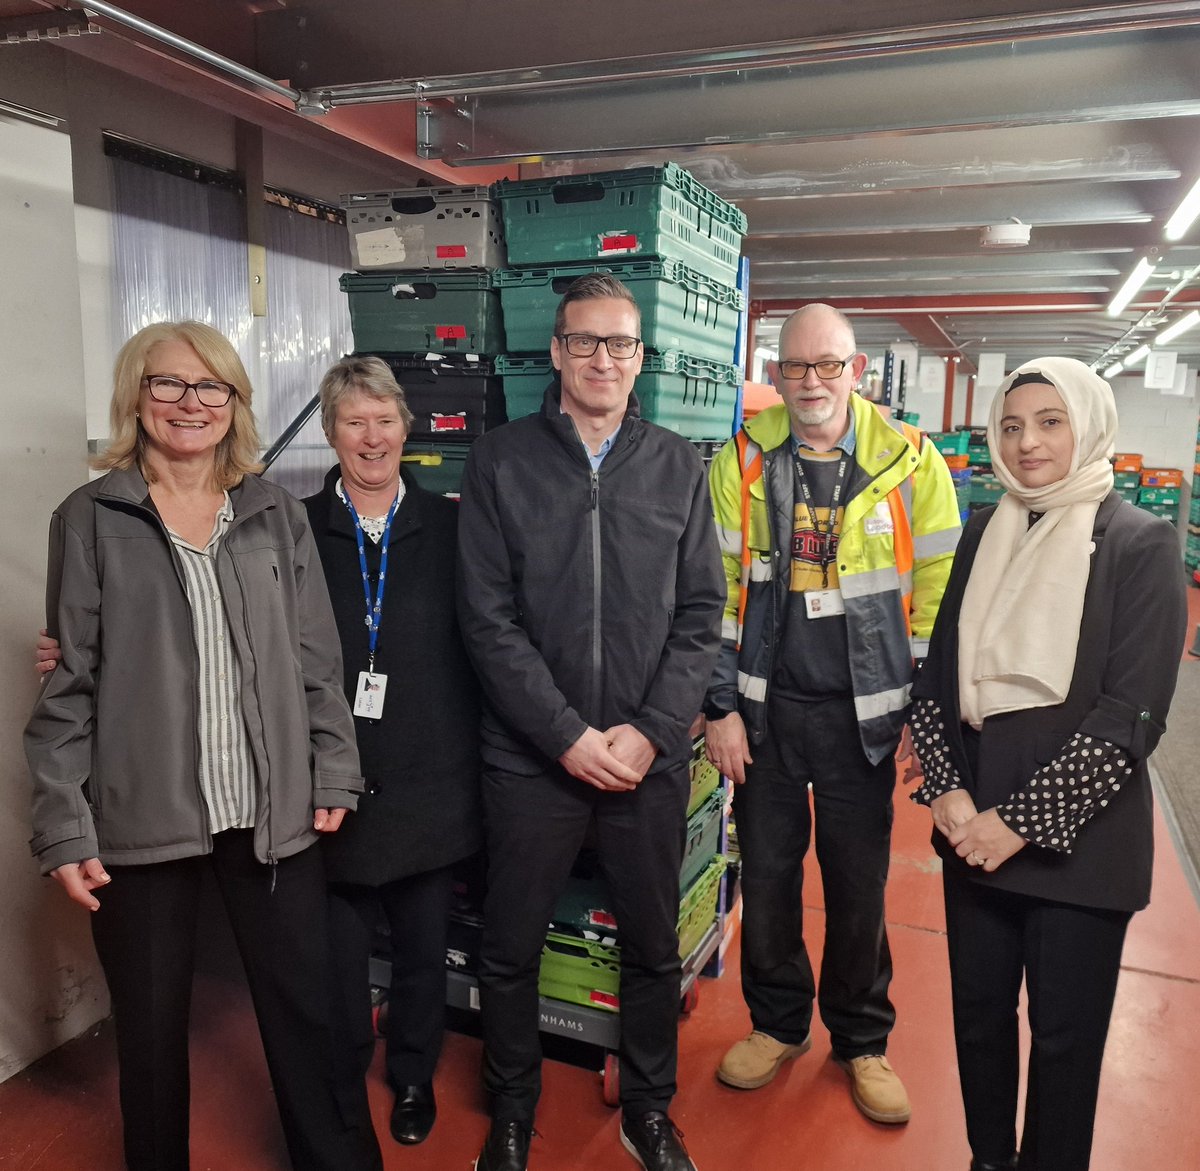 We had the opportunity to meet the new CEO of Active Luton. We gave him a tour of our work. Farewell to Helen, and welcome to Lawrence! We were also joined by our friends from the Mall for their generous £525 cash donation from selling honey.